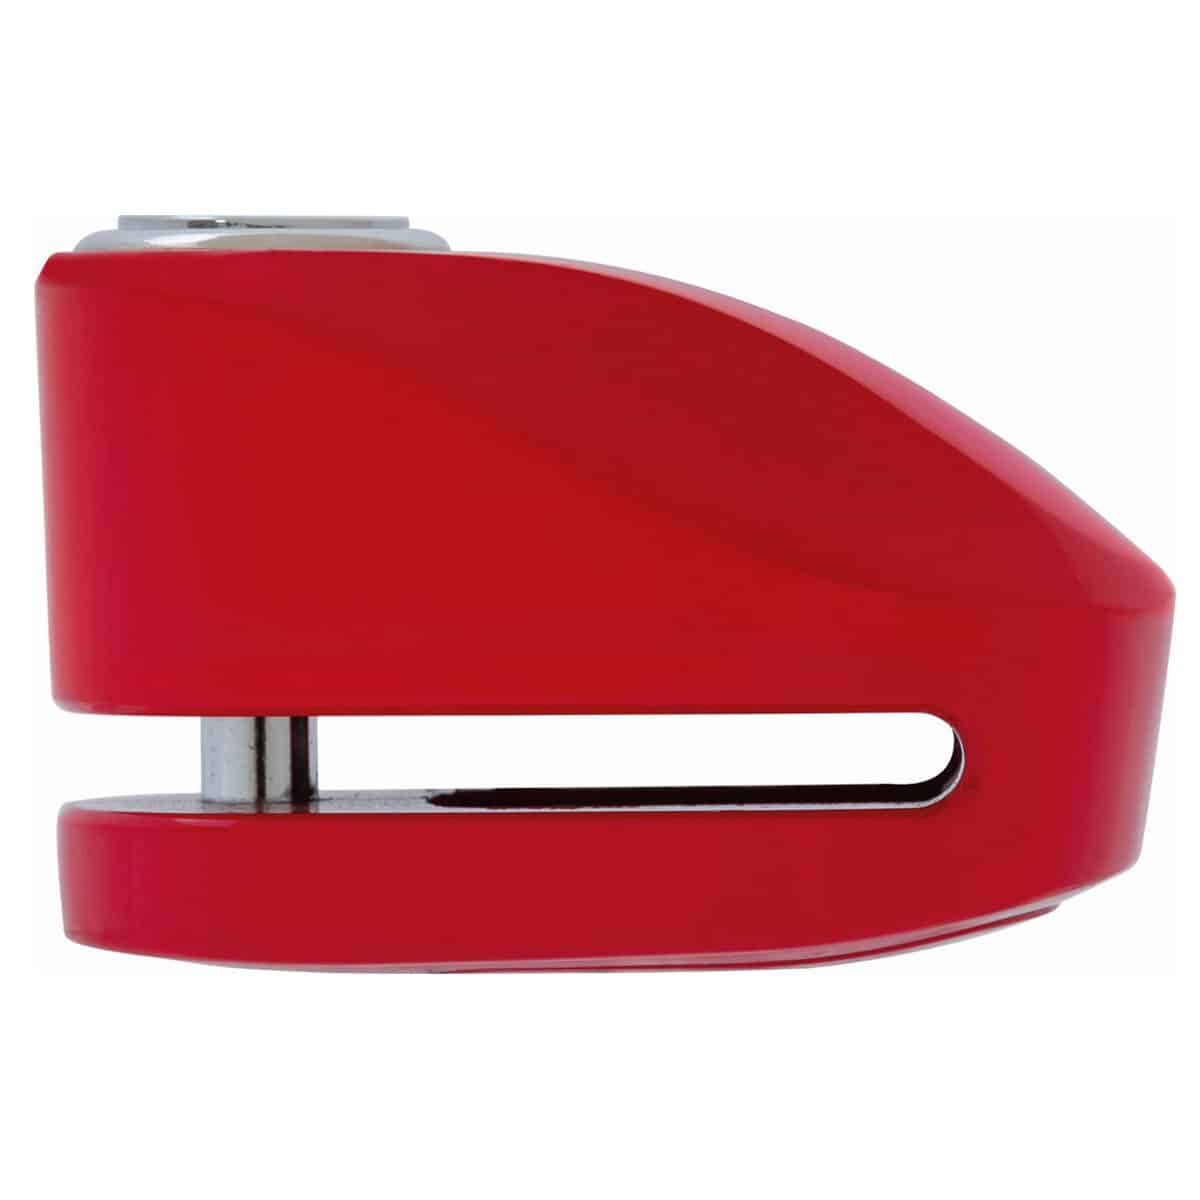 Abus 275A Alarm Disc Lock - 5mm red